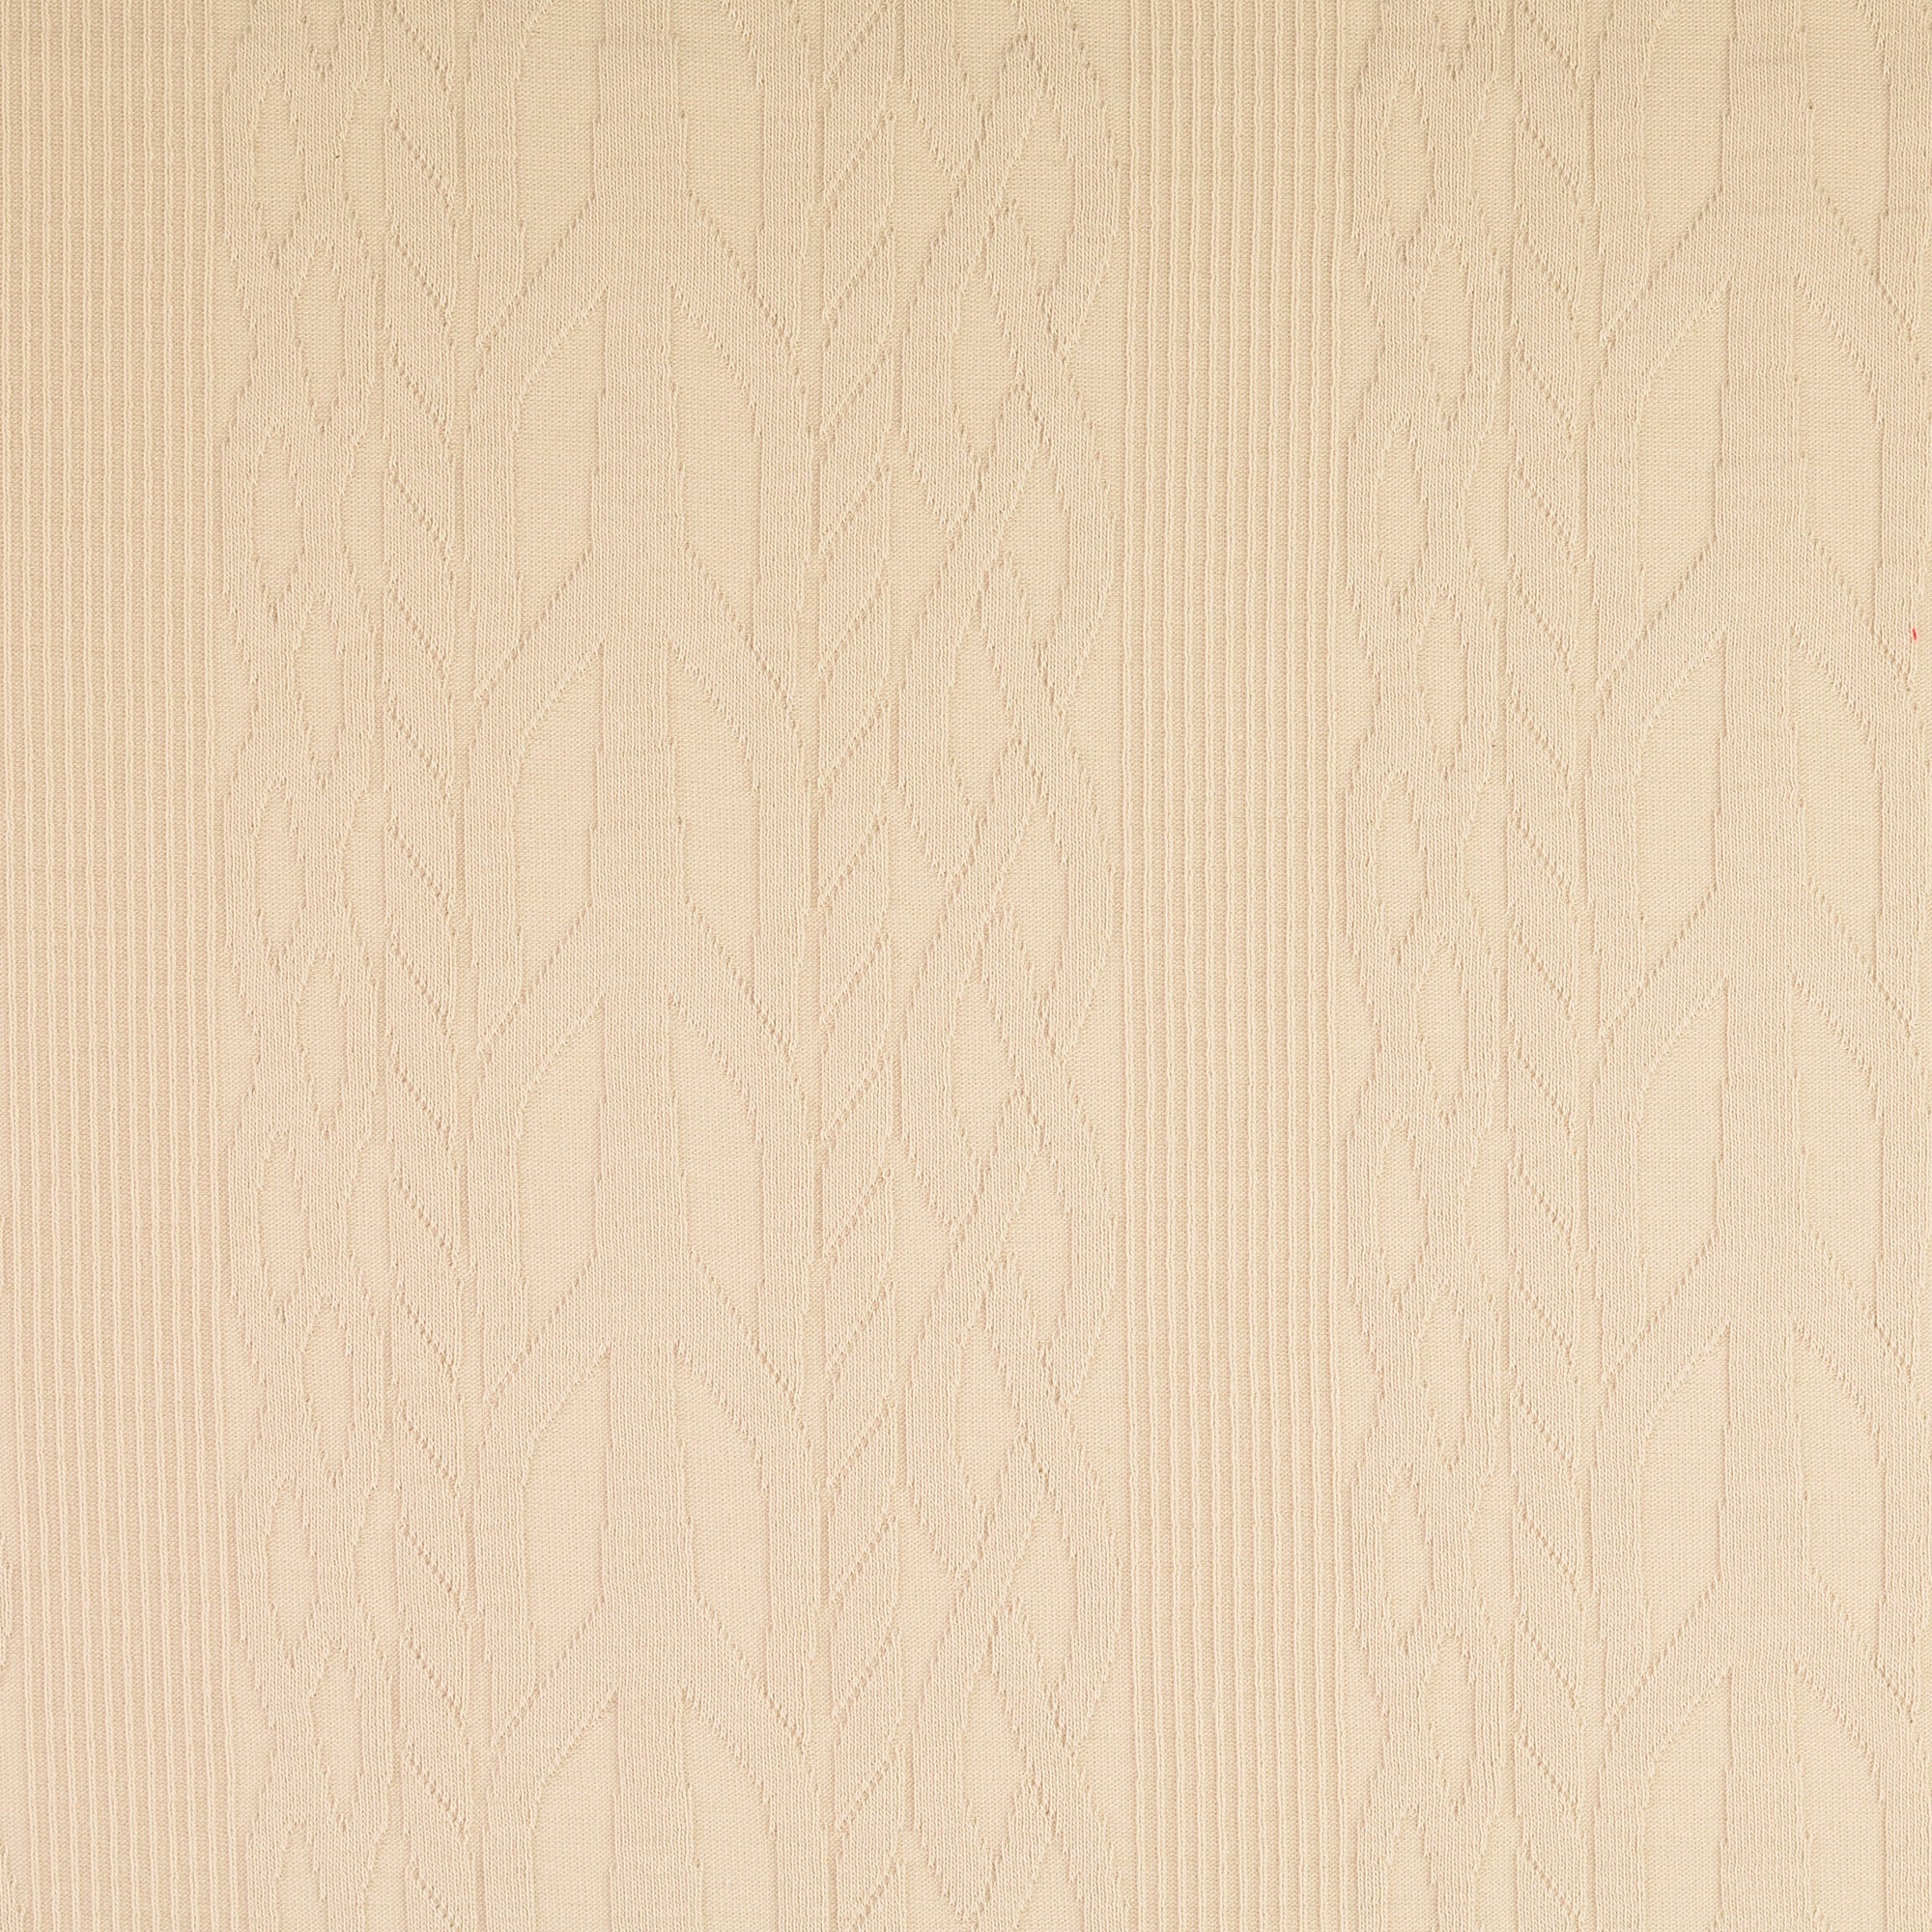 Cotton Cable Knit Fabric in Cream